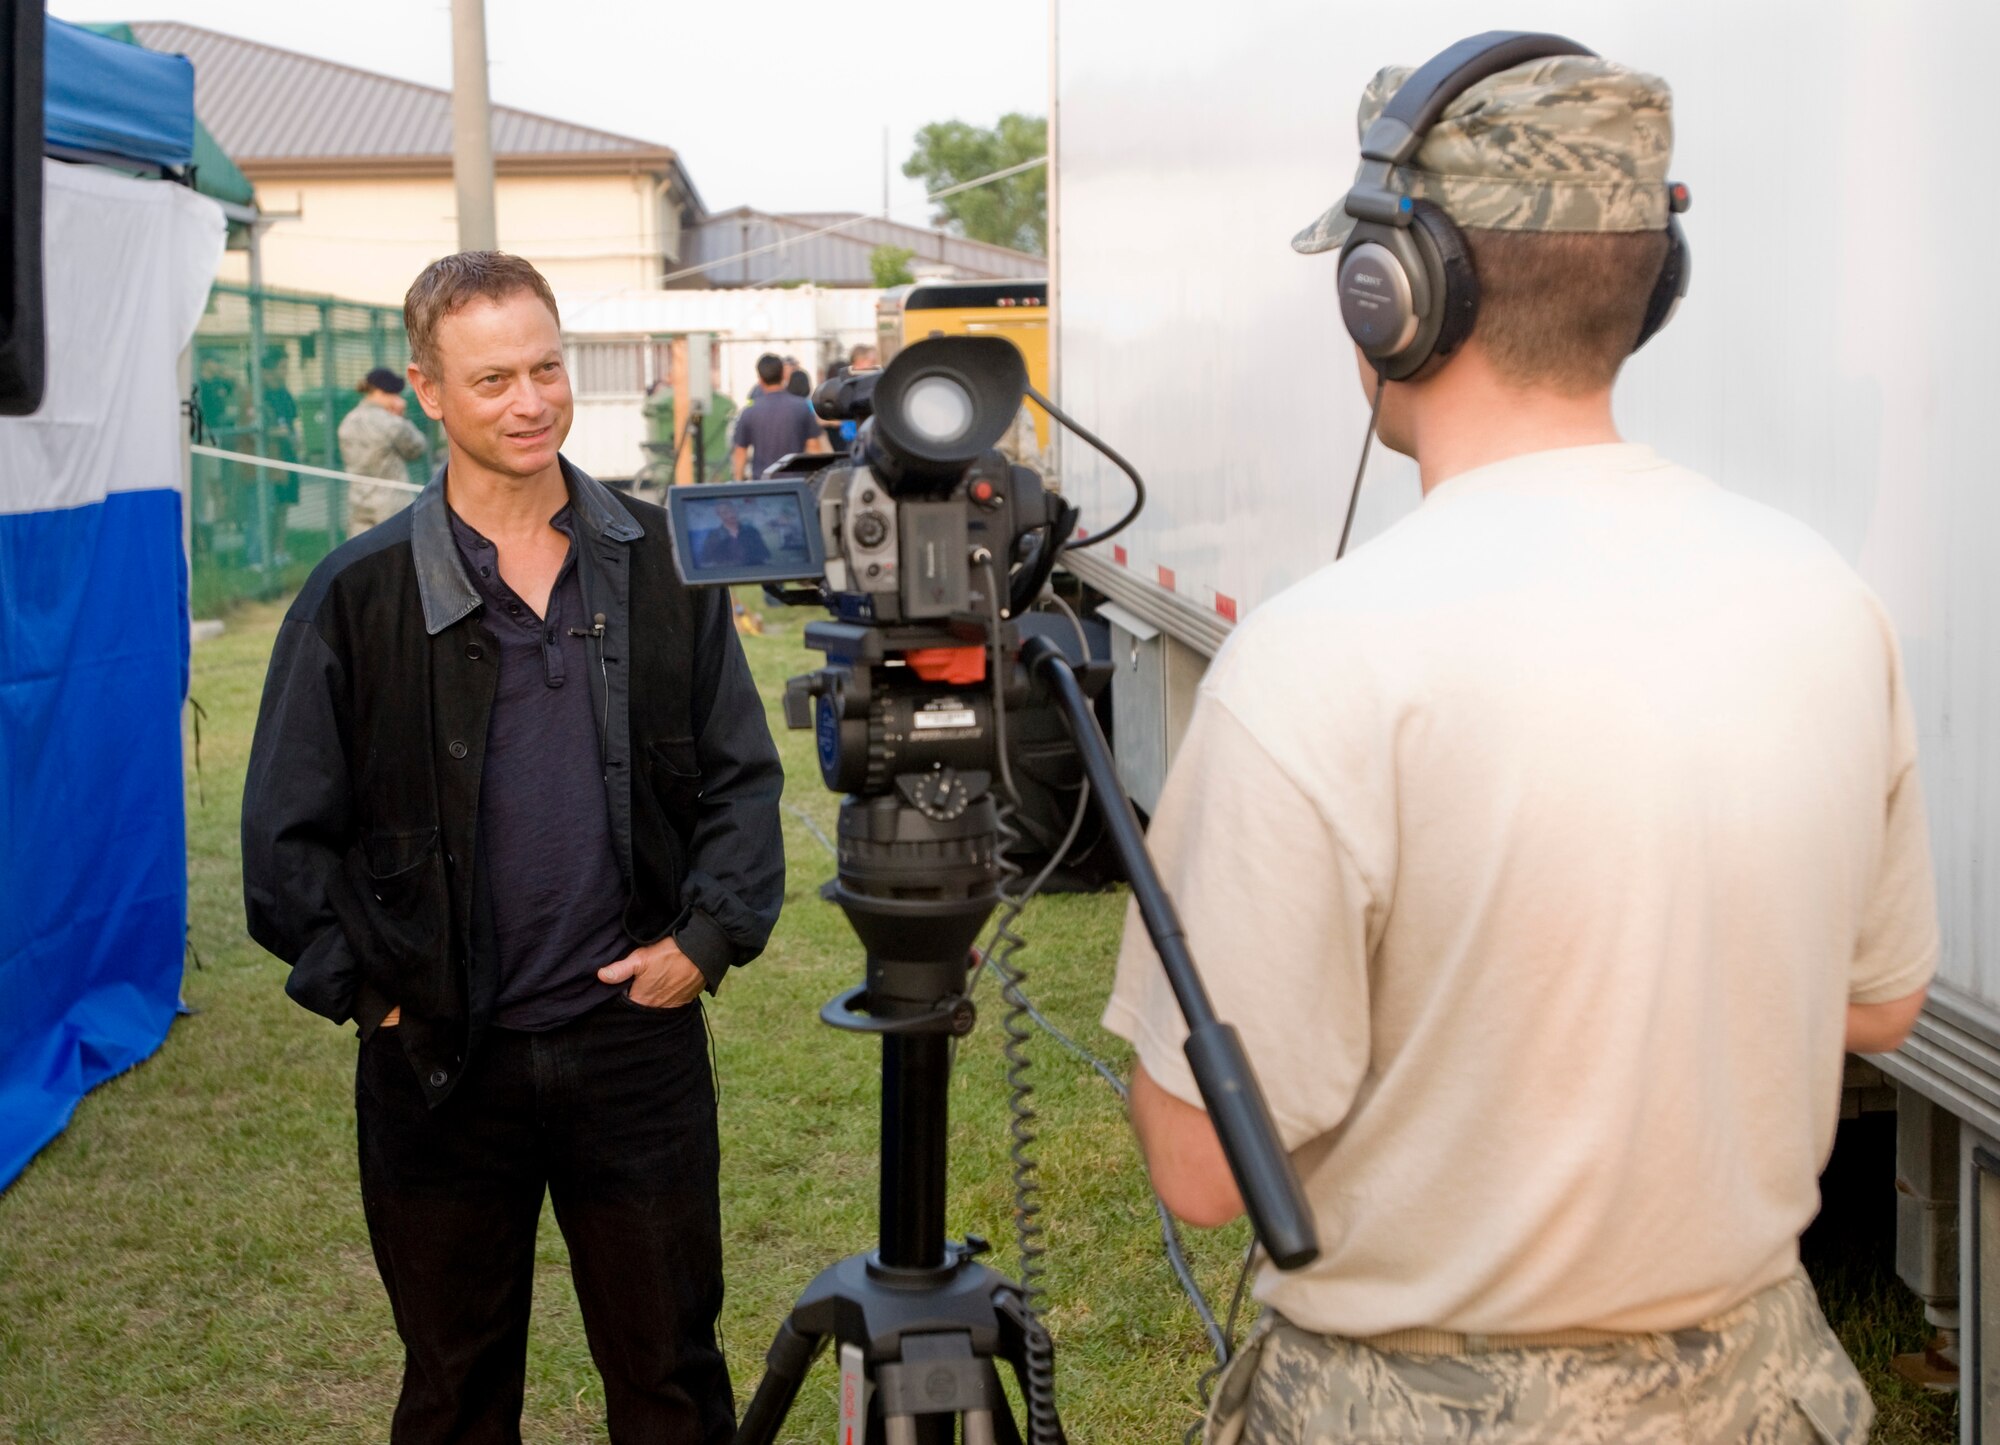 KUNSAN AIR BASE, Republic of Korea -- Gary Sinise, the bassist for Lt. Dan Band, gives an interview to Staff Sgt. Michael Schocker, Armed Forces Network Korea, about why he and his band do shows for the troops June 24. The Lt. Dan Band stopped at the Wolf Pack as part of their Asia USO tour. (U.S. Air Force photo by Senior Airman Jonathan Steffen)